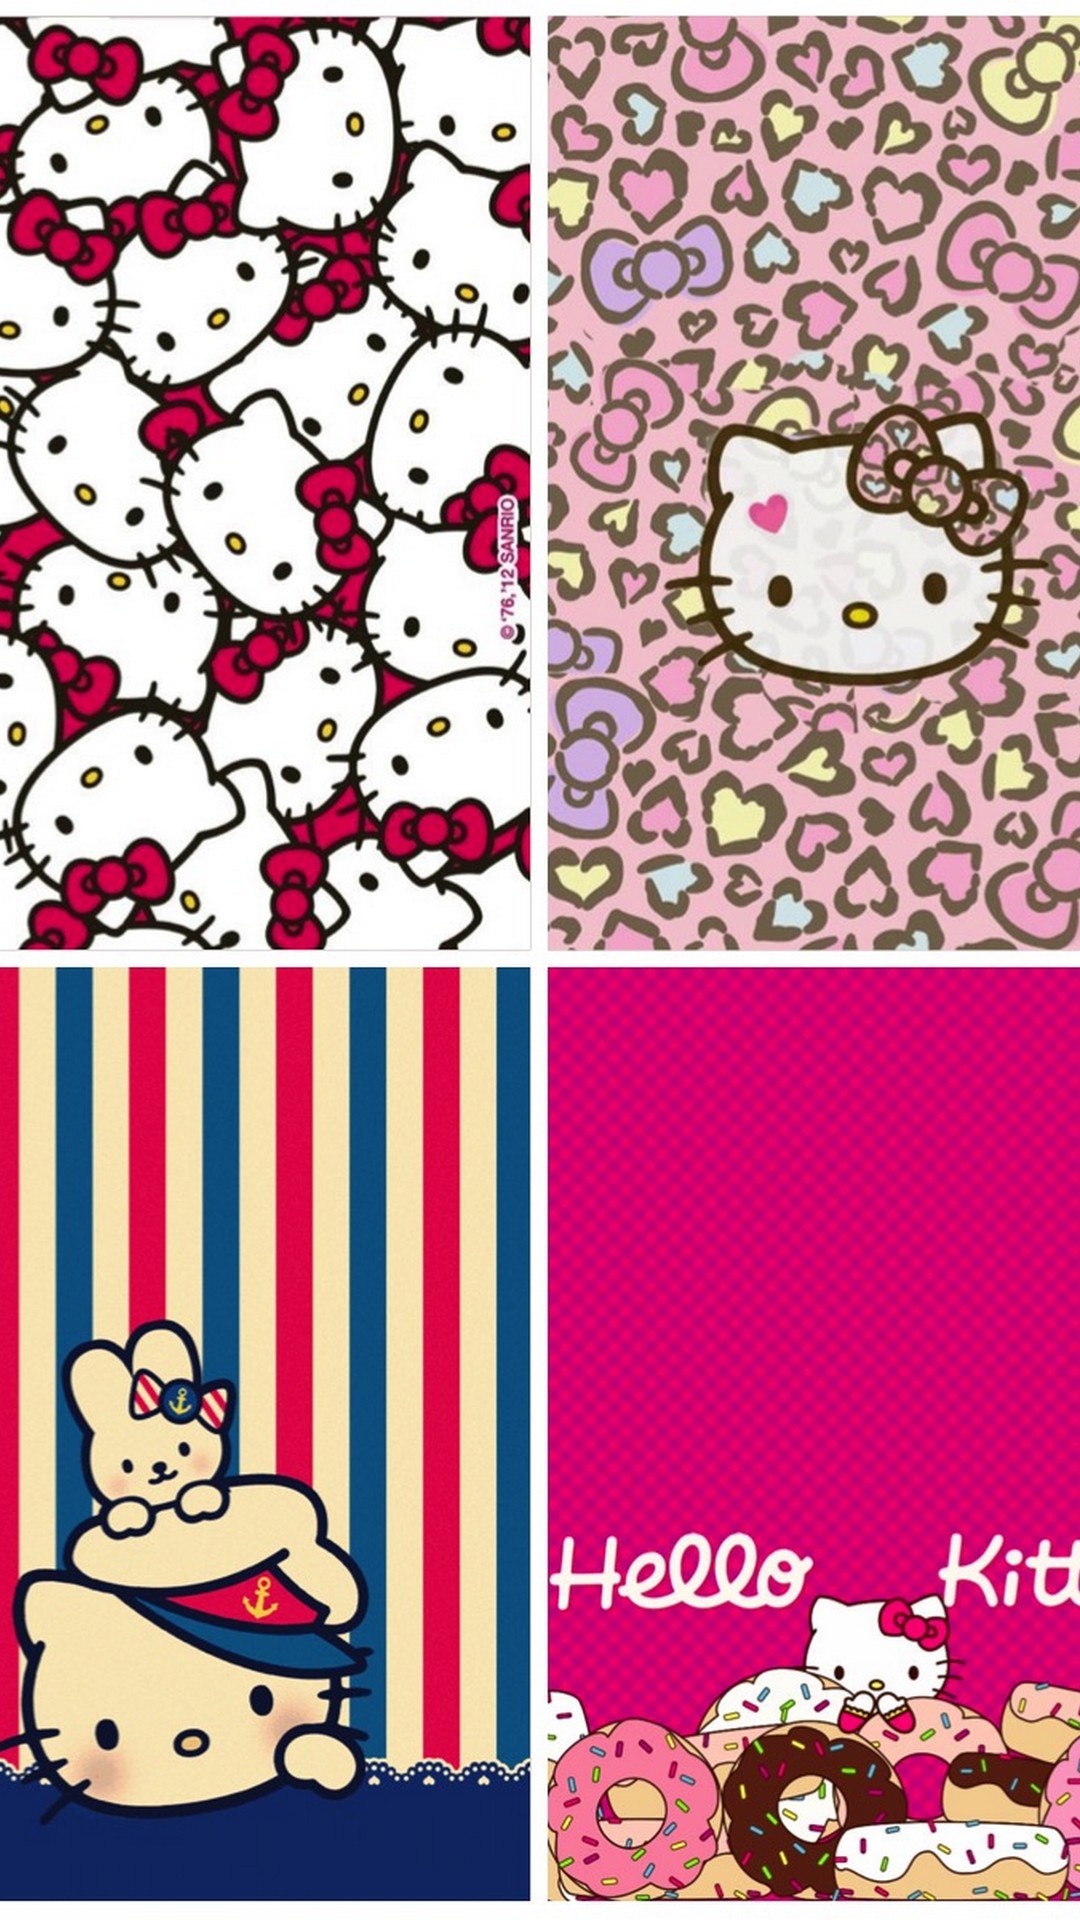 Hello Kitty Pictures iPhone 7 Plus Wallpaper with image resolution 1080x1920 pixel. You can use this wallpaper as background for your desktop Computer Screensavers, Android or iPhone smartphones